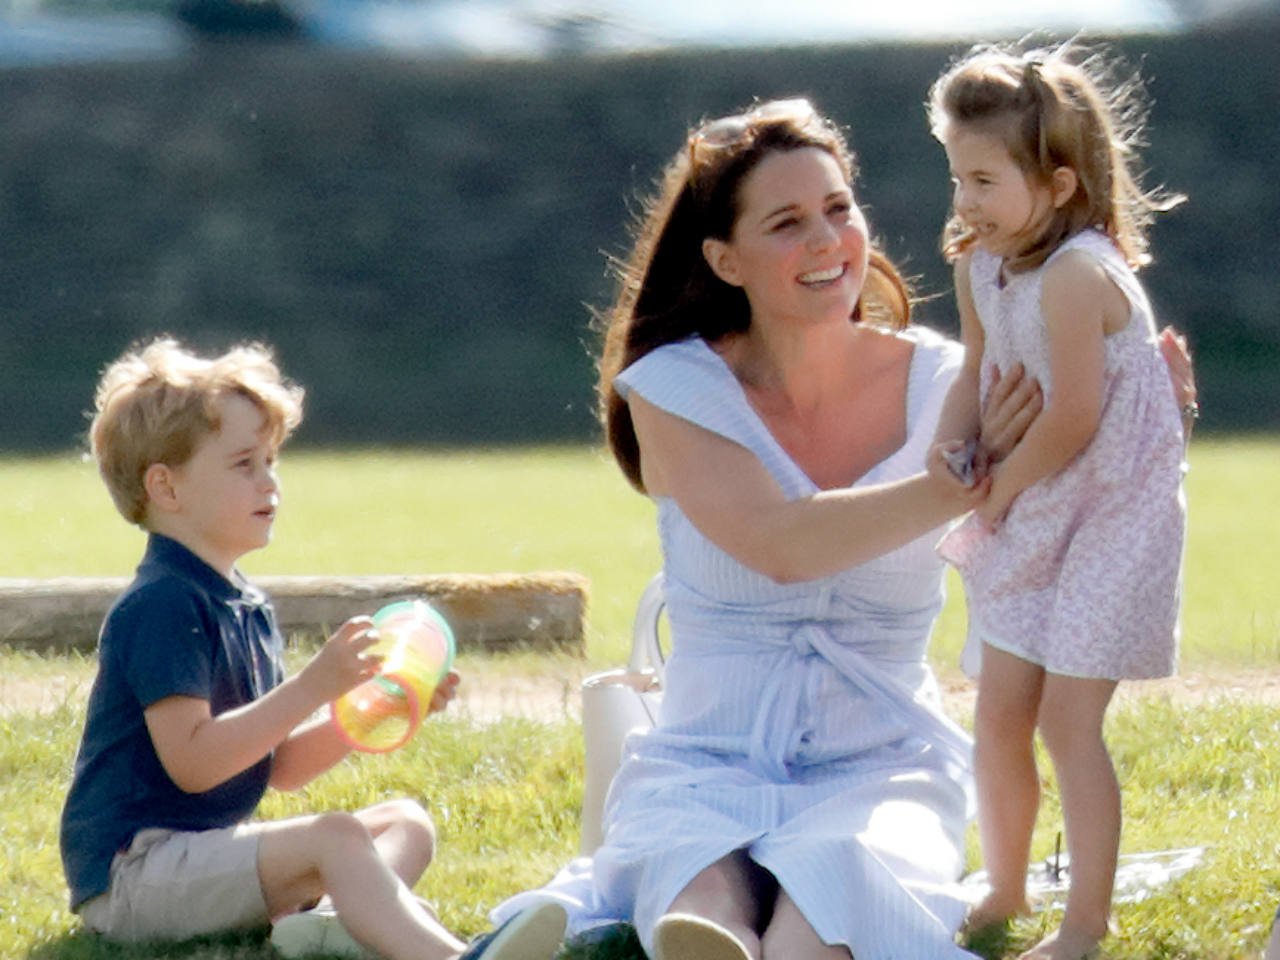 17 times Kate Middleton was just a regular mom